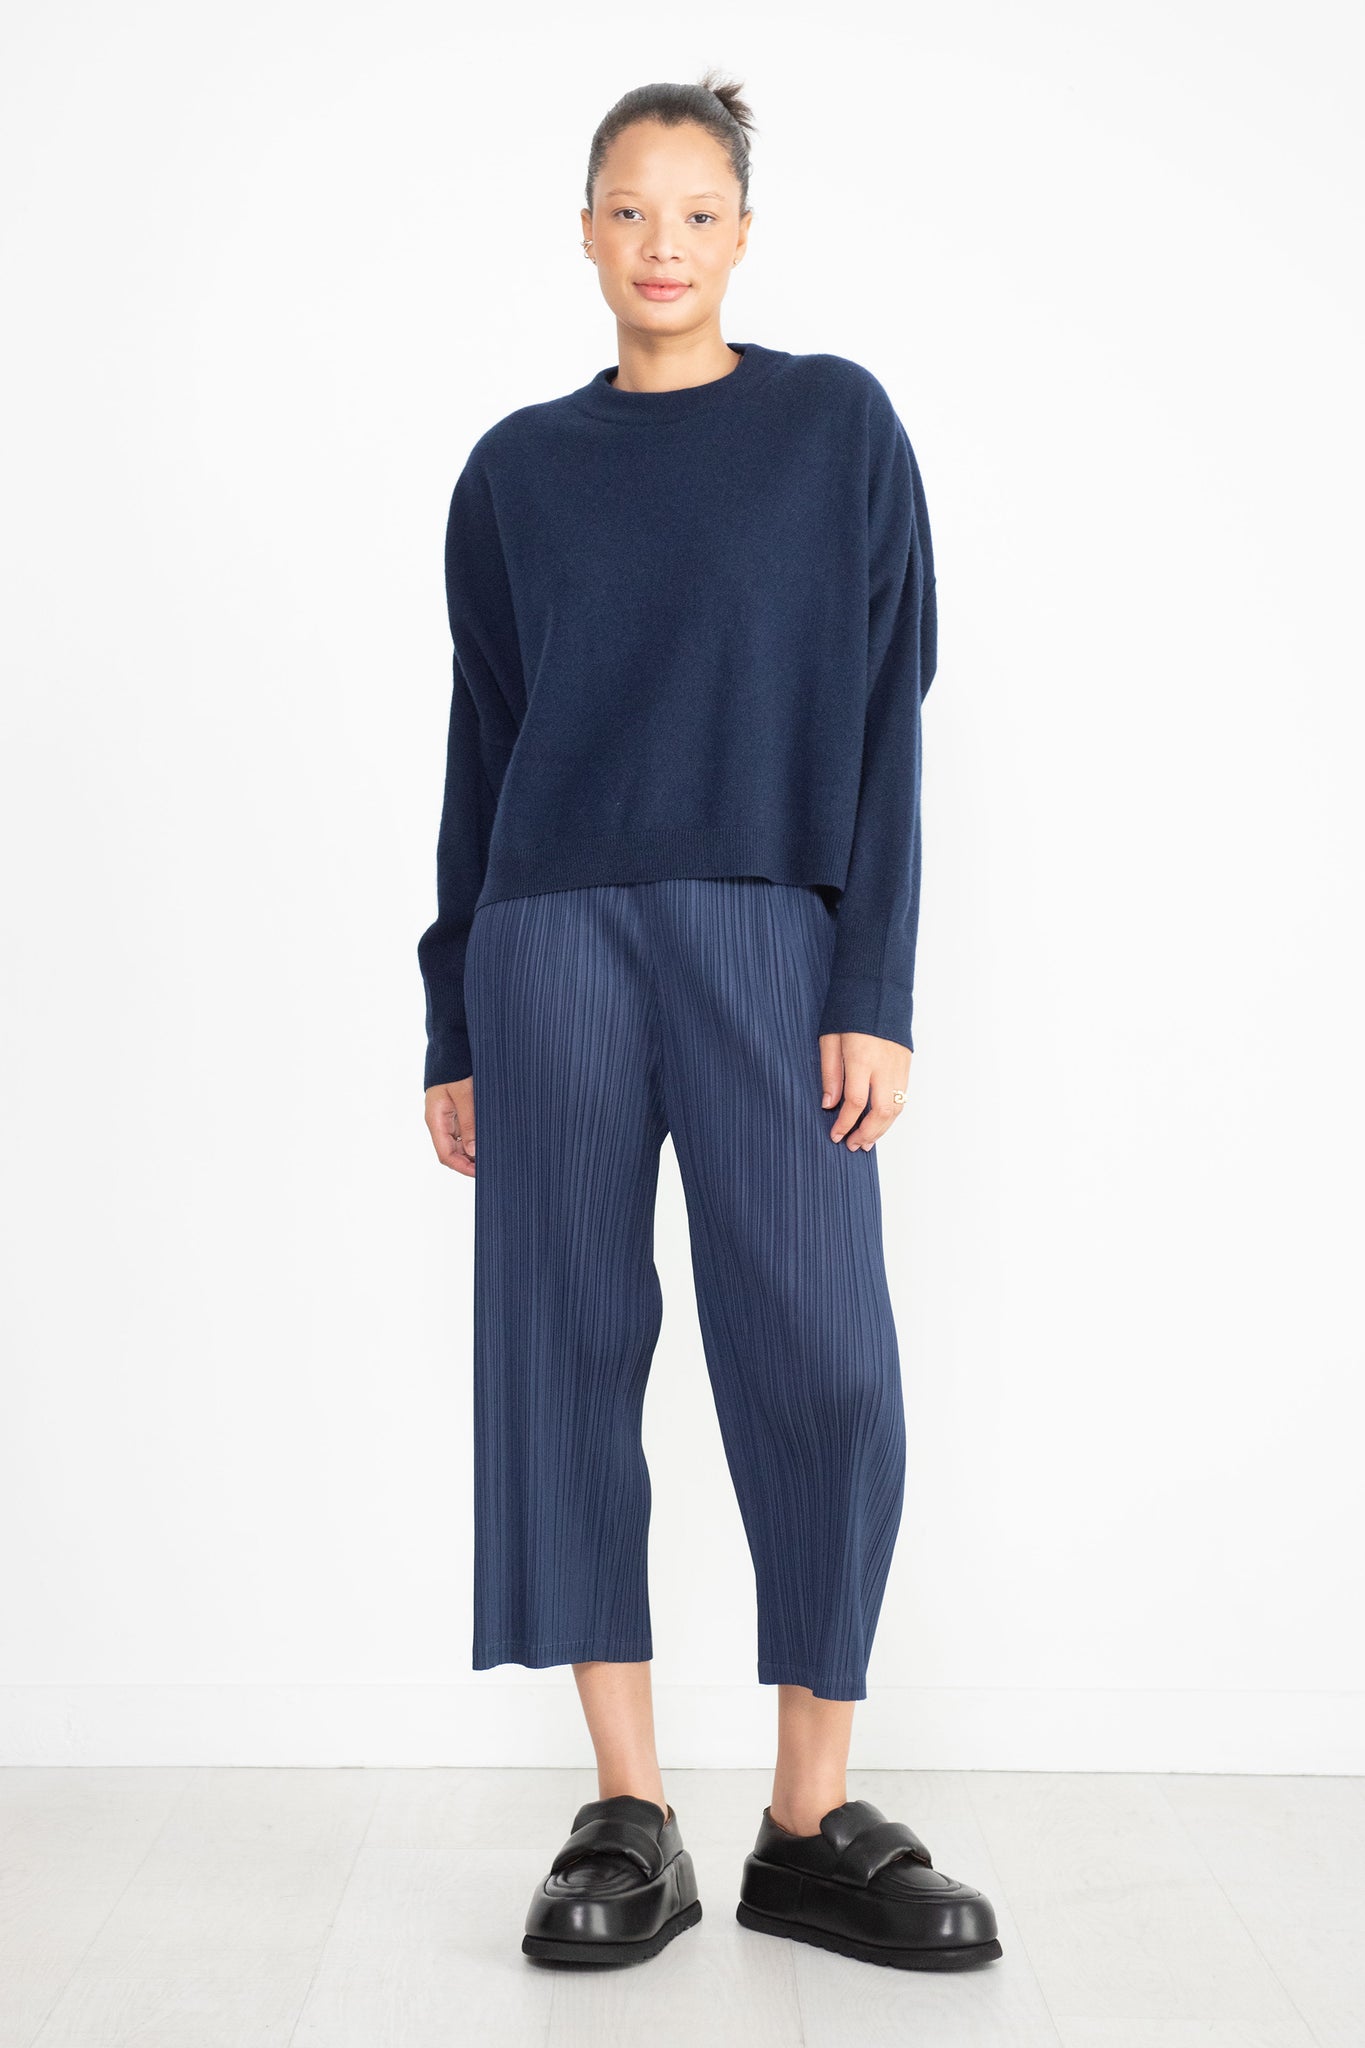 Pleats Please by Issey Miyake - Monthly Colors: August Pants, Dark Navy